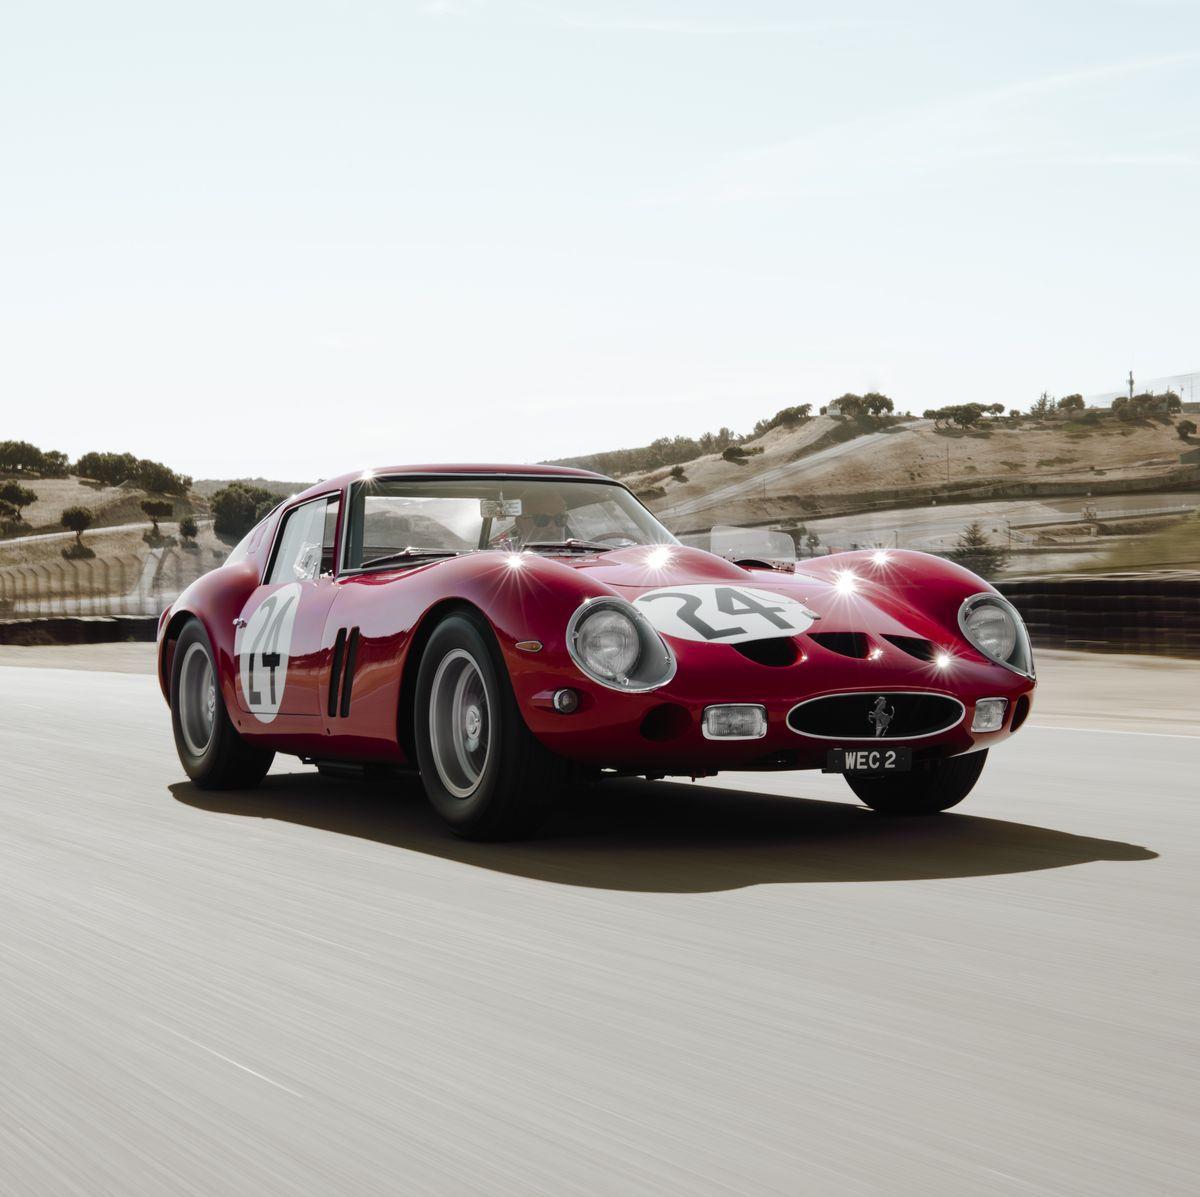 How The Ferrari Gto Became Most Valuable Car Of All Time